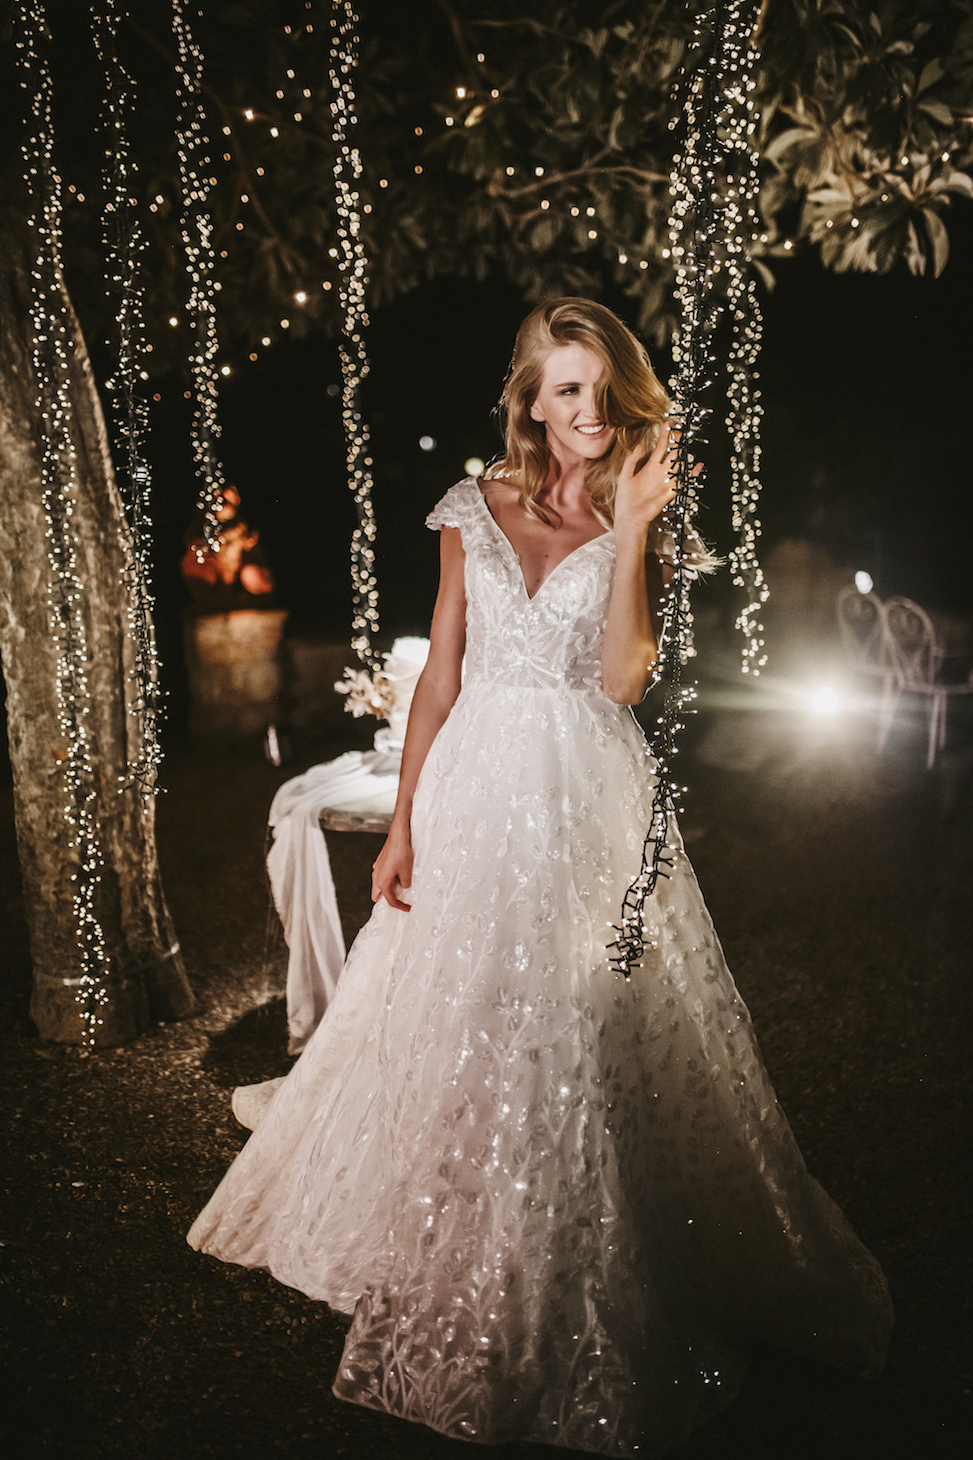 Woman outside among string lights, smiling, wearing a shimmery short sleeved white wedding dress from Allure Bridal